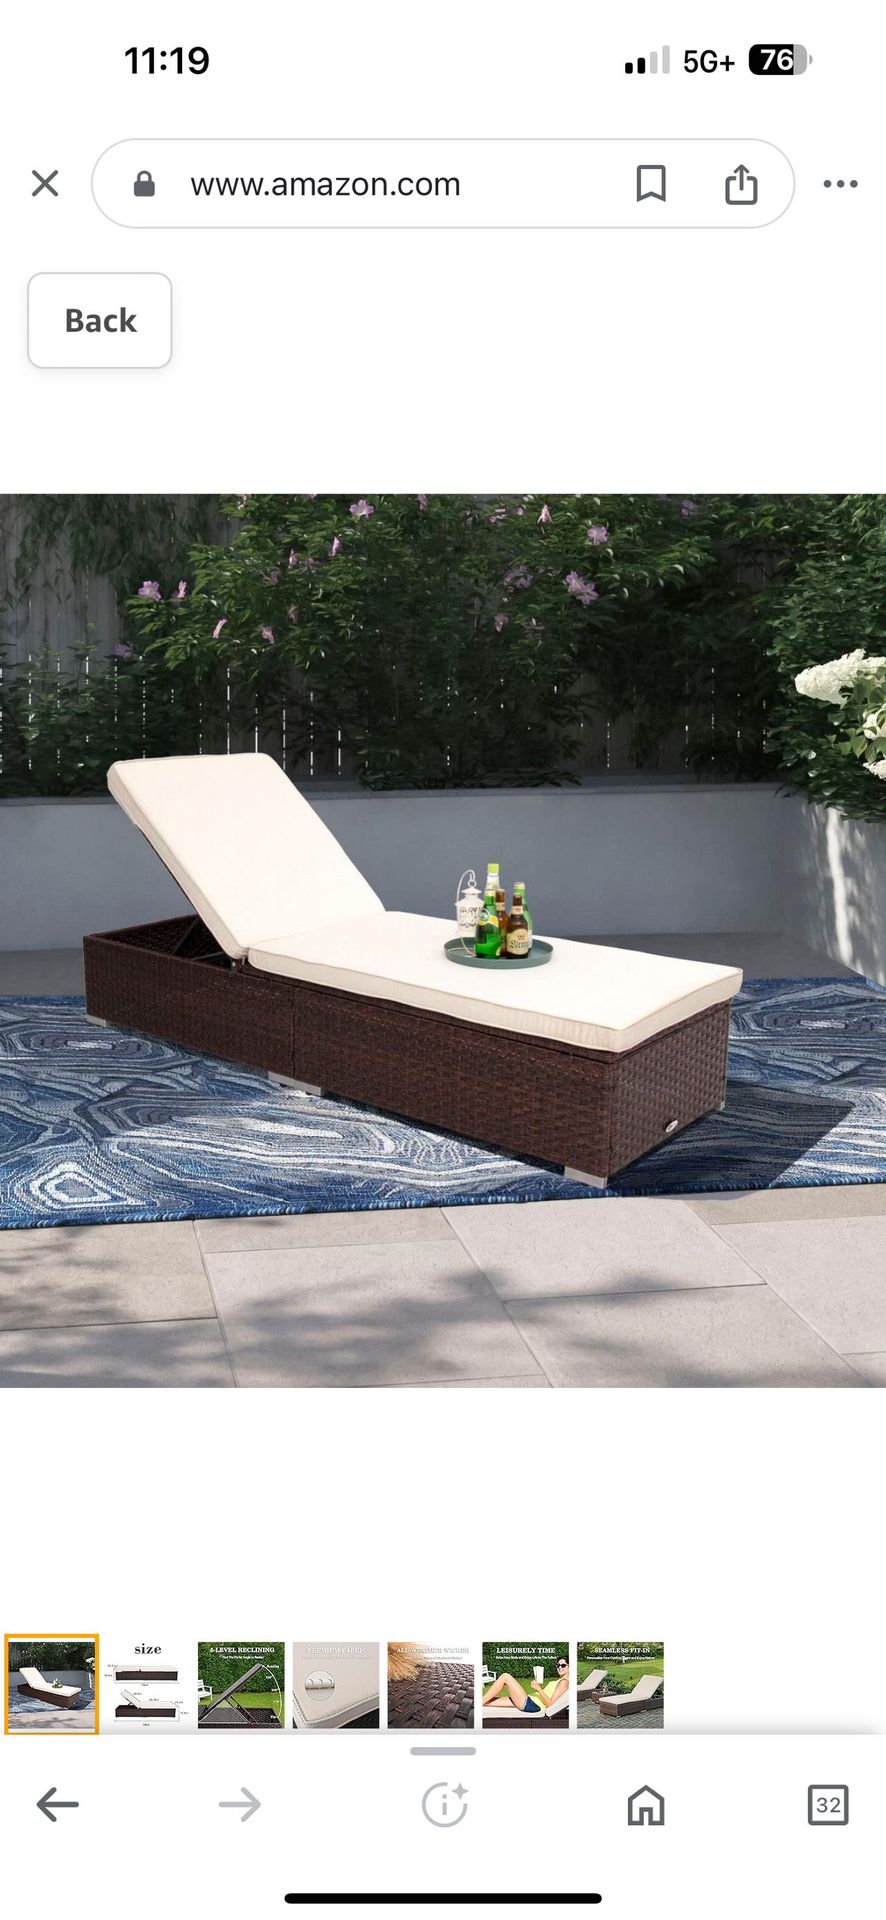  Outdoor Chaise Lounge,Wicker Pool Lounge Chairs,Patio Recliner with Cushion,Mixed Brown